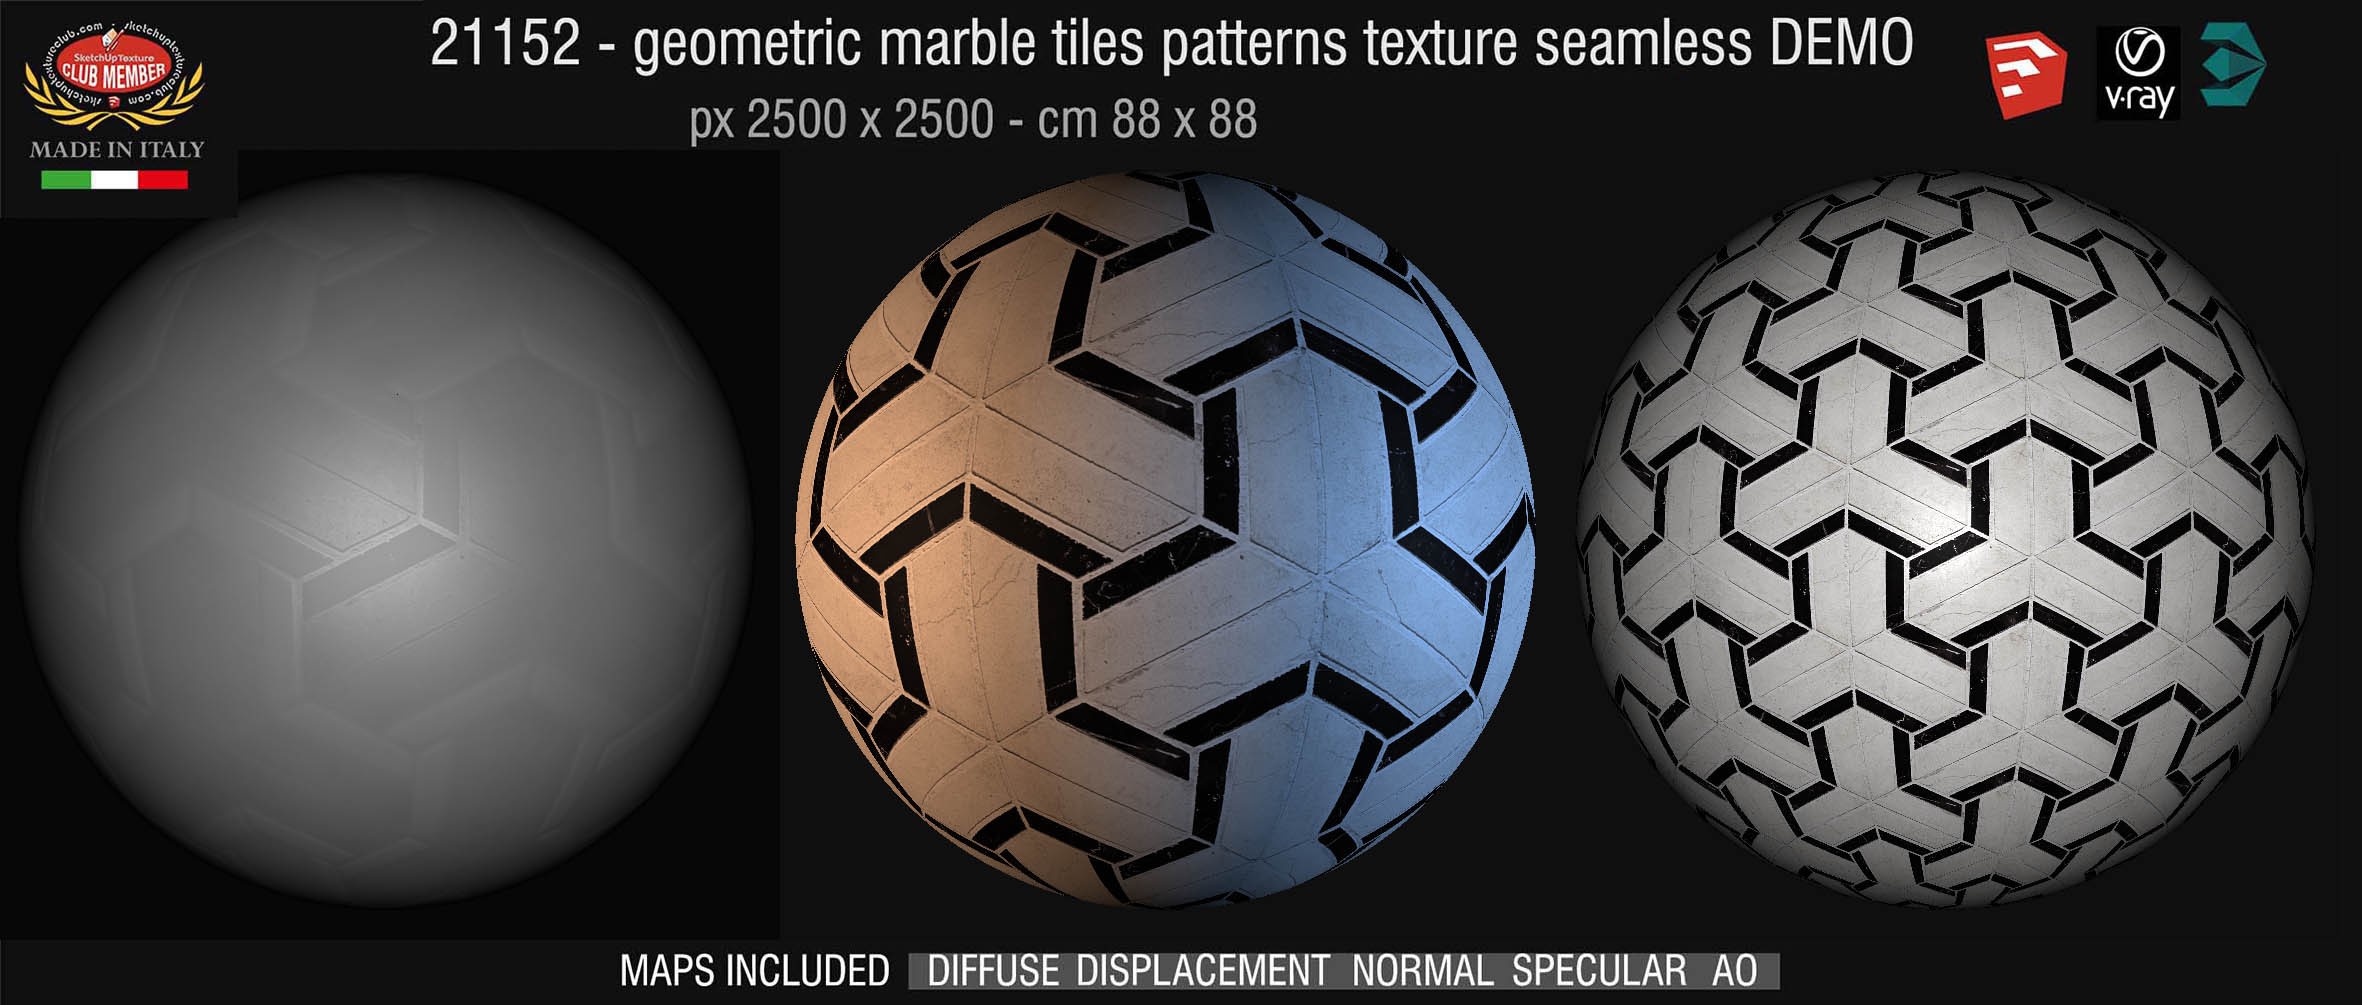 21152 Geometric marble tiles patterns texture seamless + maps DEMO